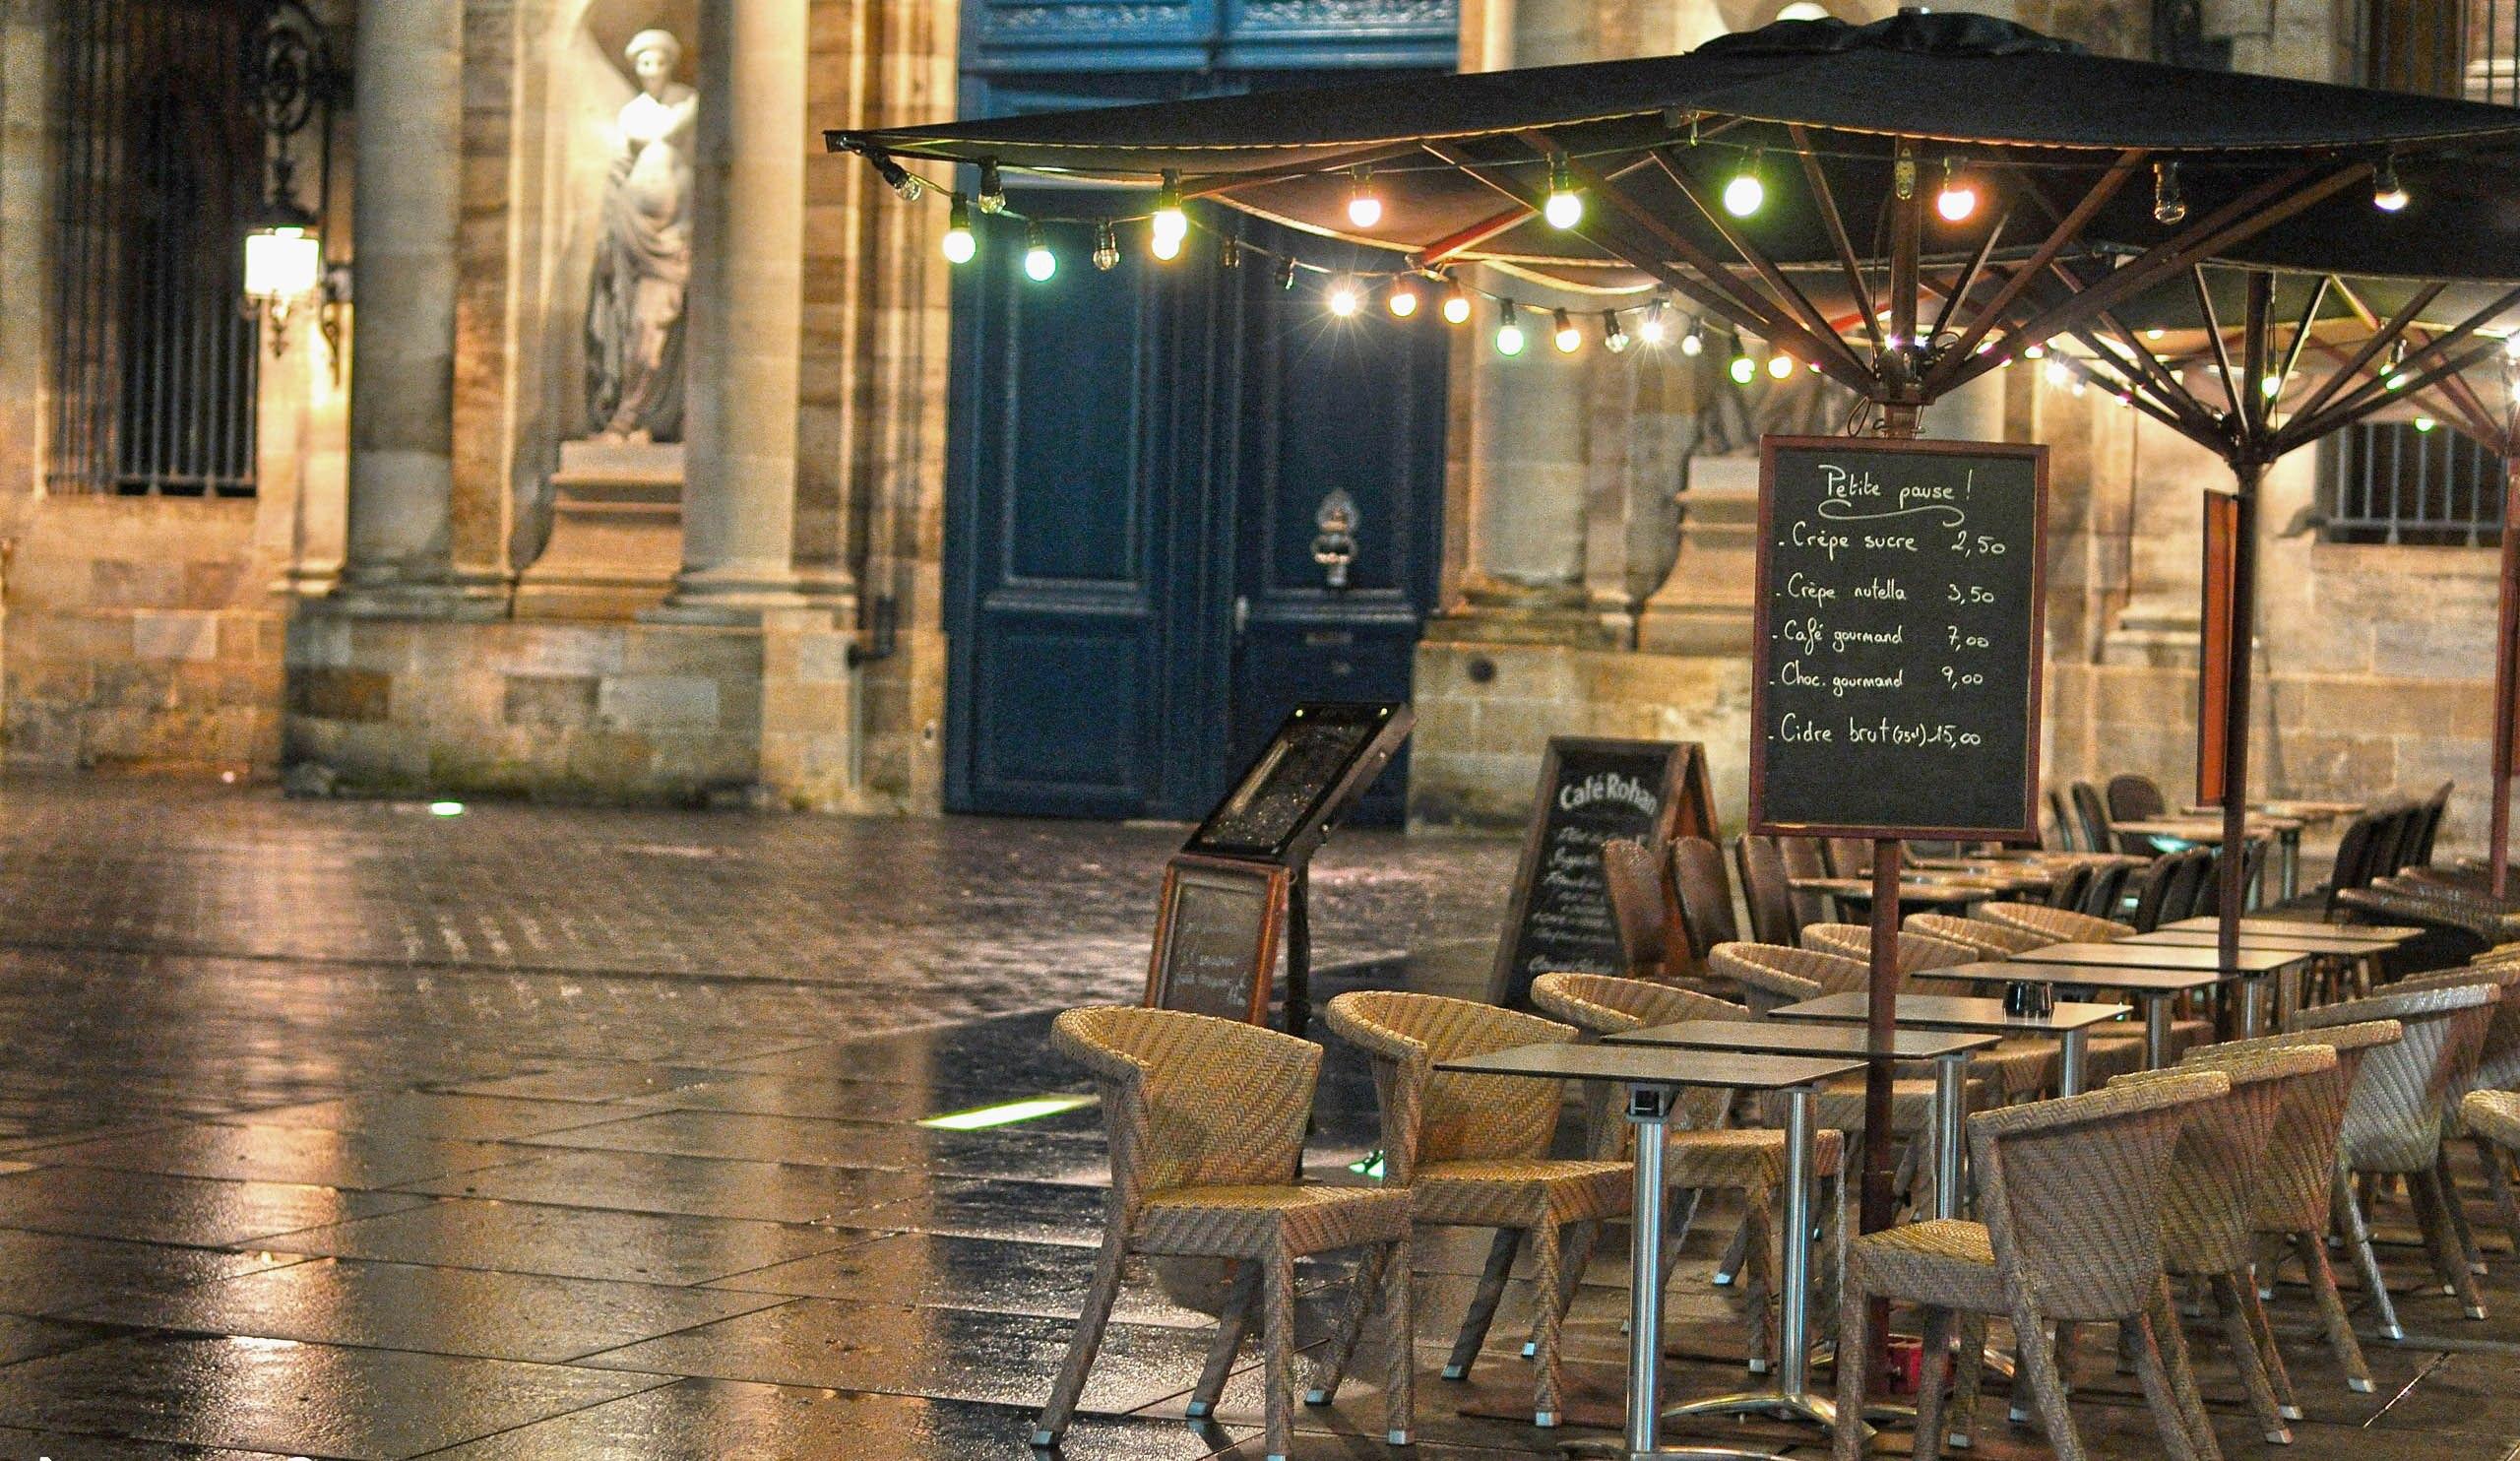 Street cafe in Bordeaux, France wallpaper and image